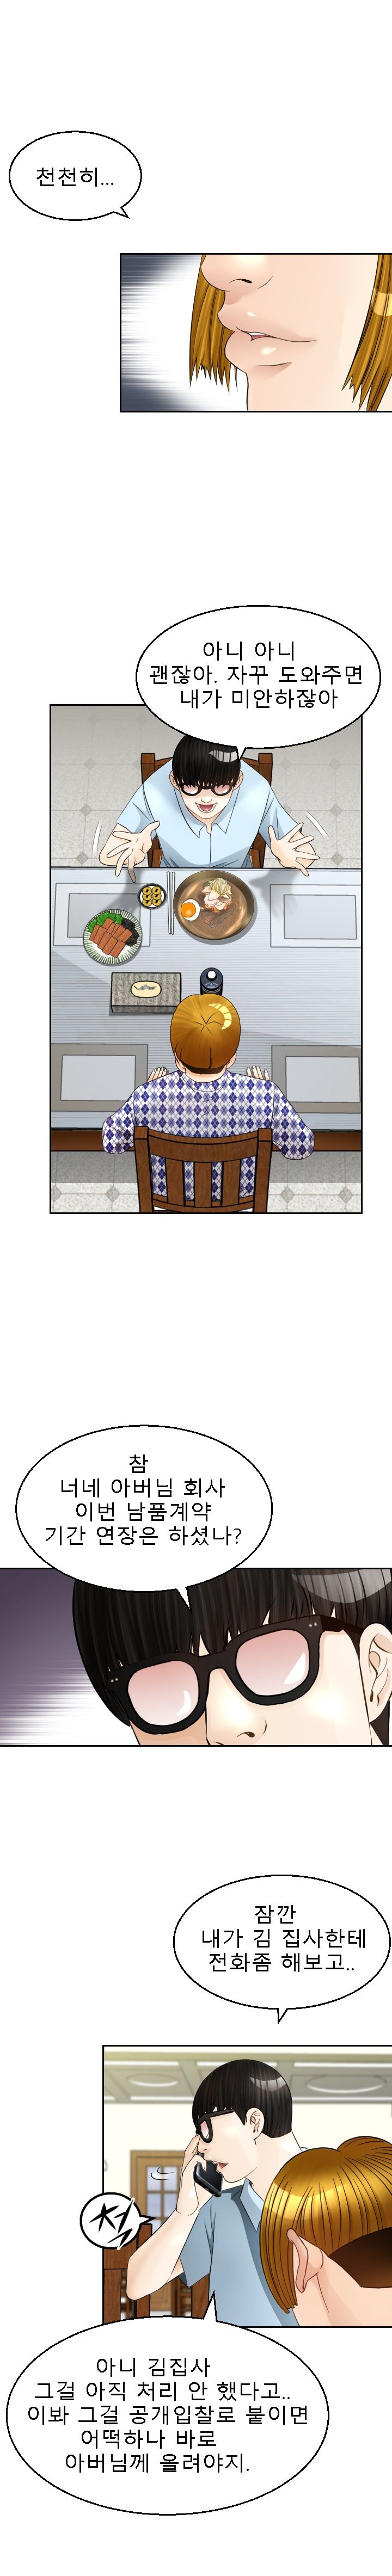 Restaurant Pyongyang Raw - Chapter 7 Page 3